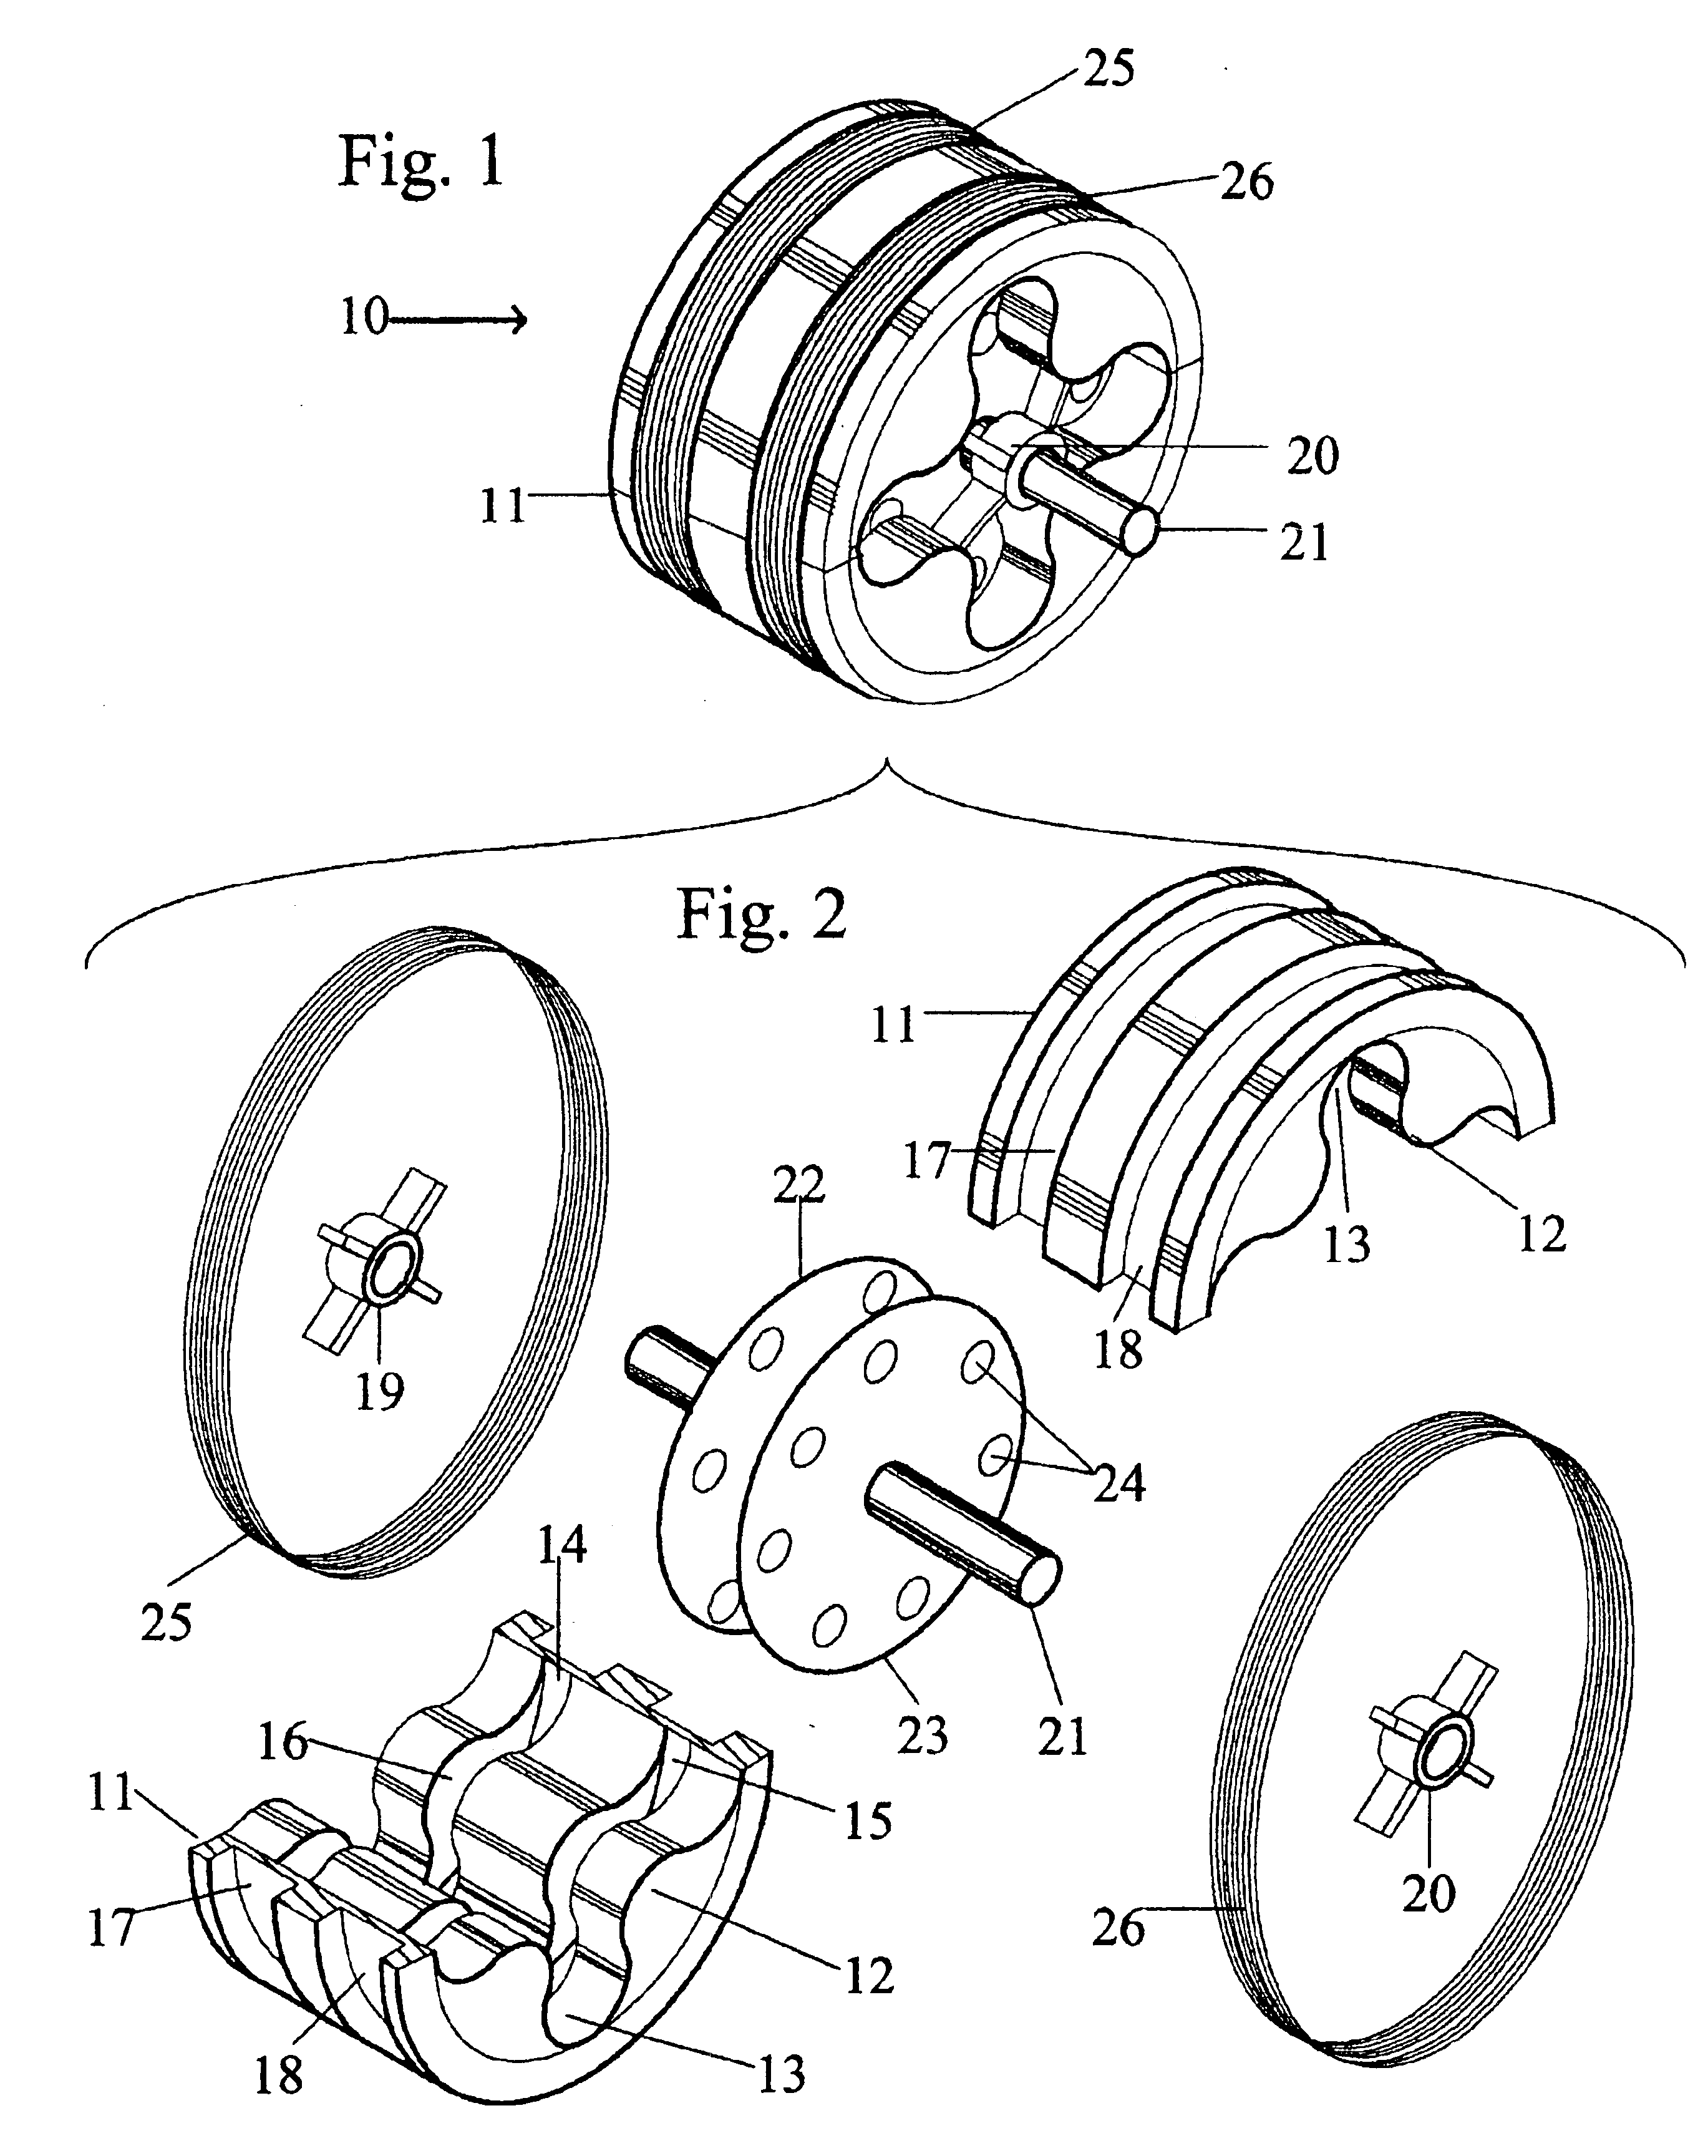 Axial flux motor with active flux shaping